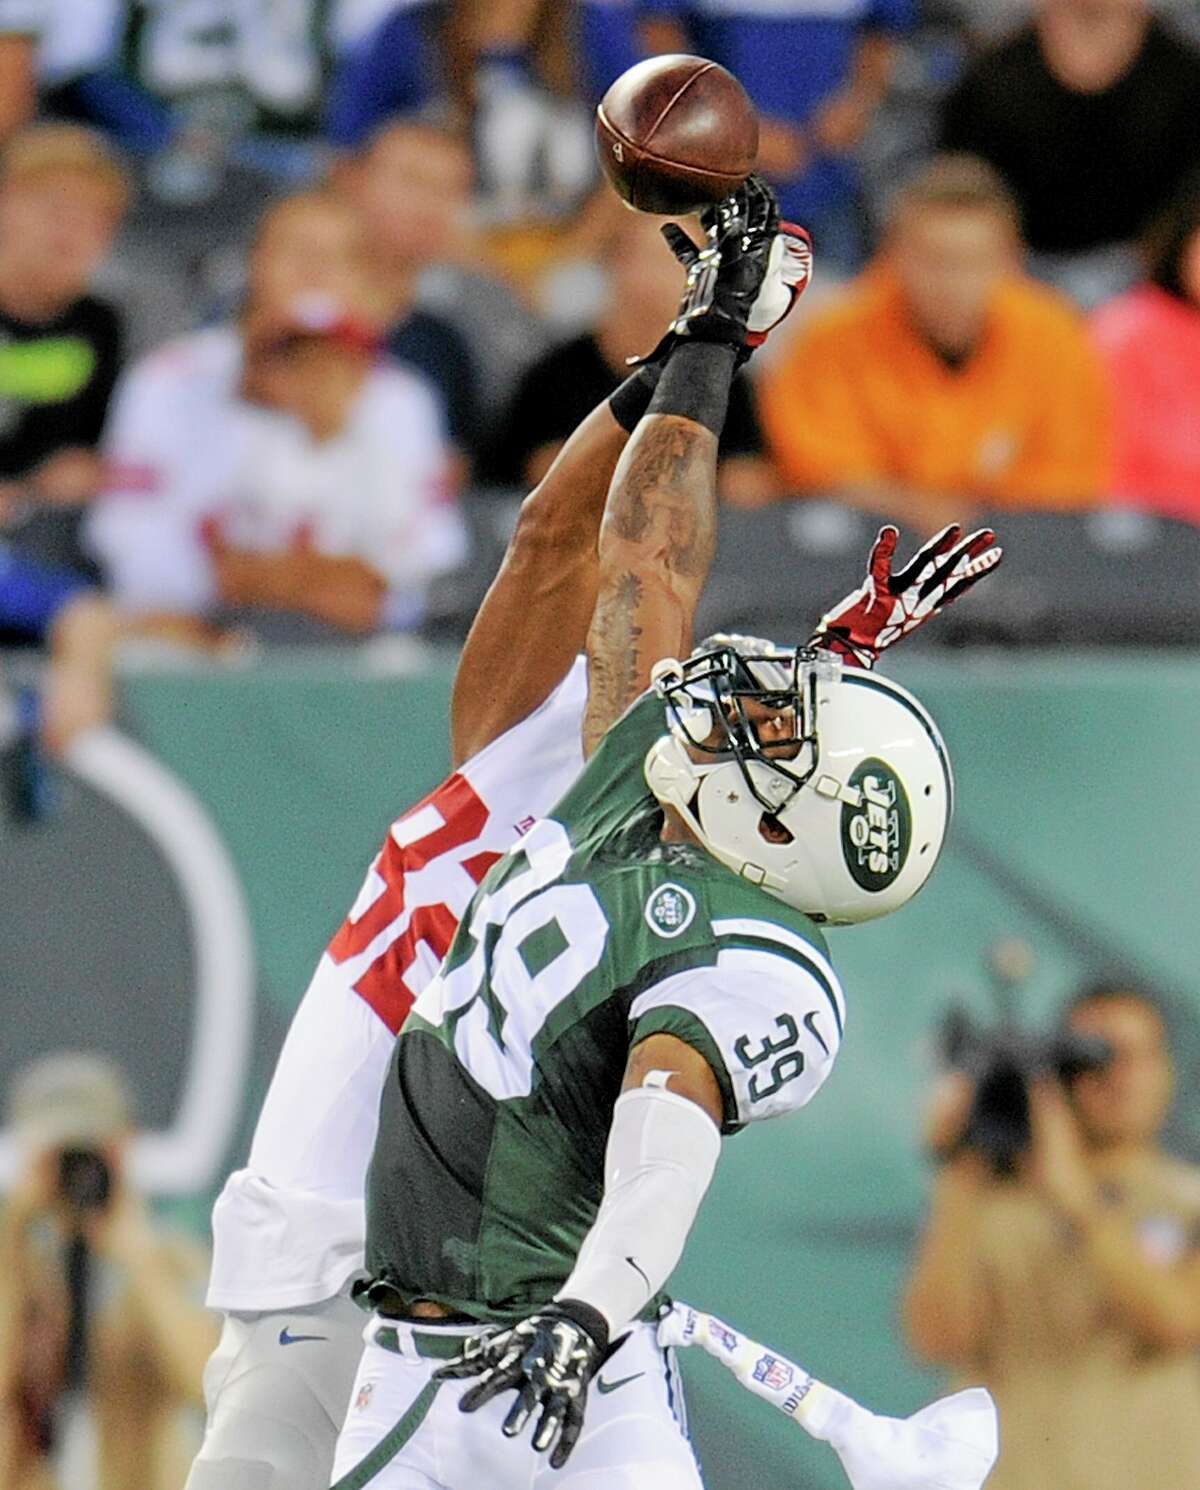 New York Jets free safety Antonio Allen (39) breaks up a pass intended for New York Giants receiver Rueben Randle (82) in an Aug. 22 preseason game in East Rutherford, N.J.